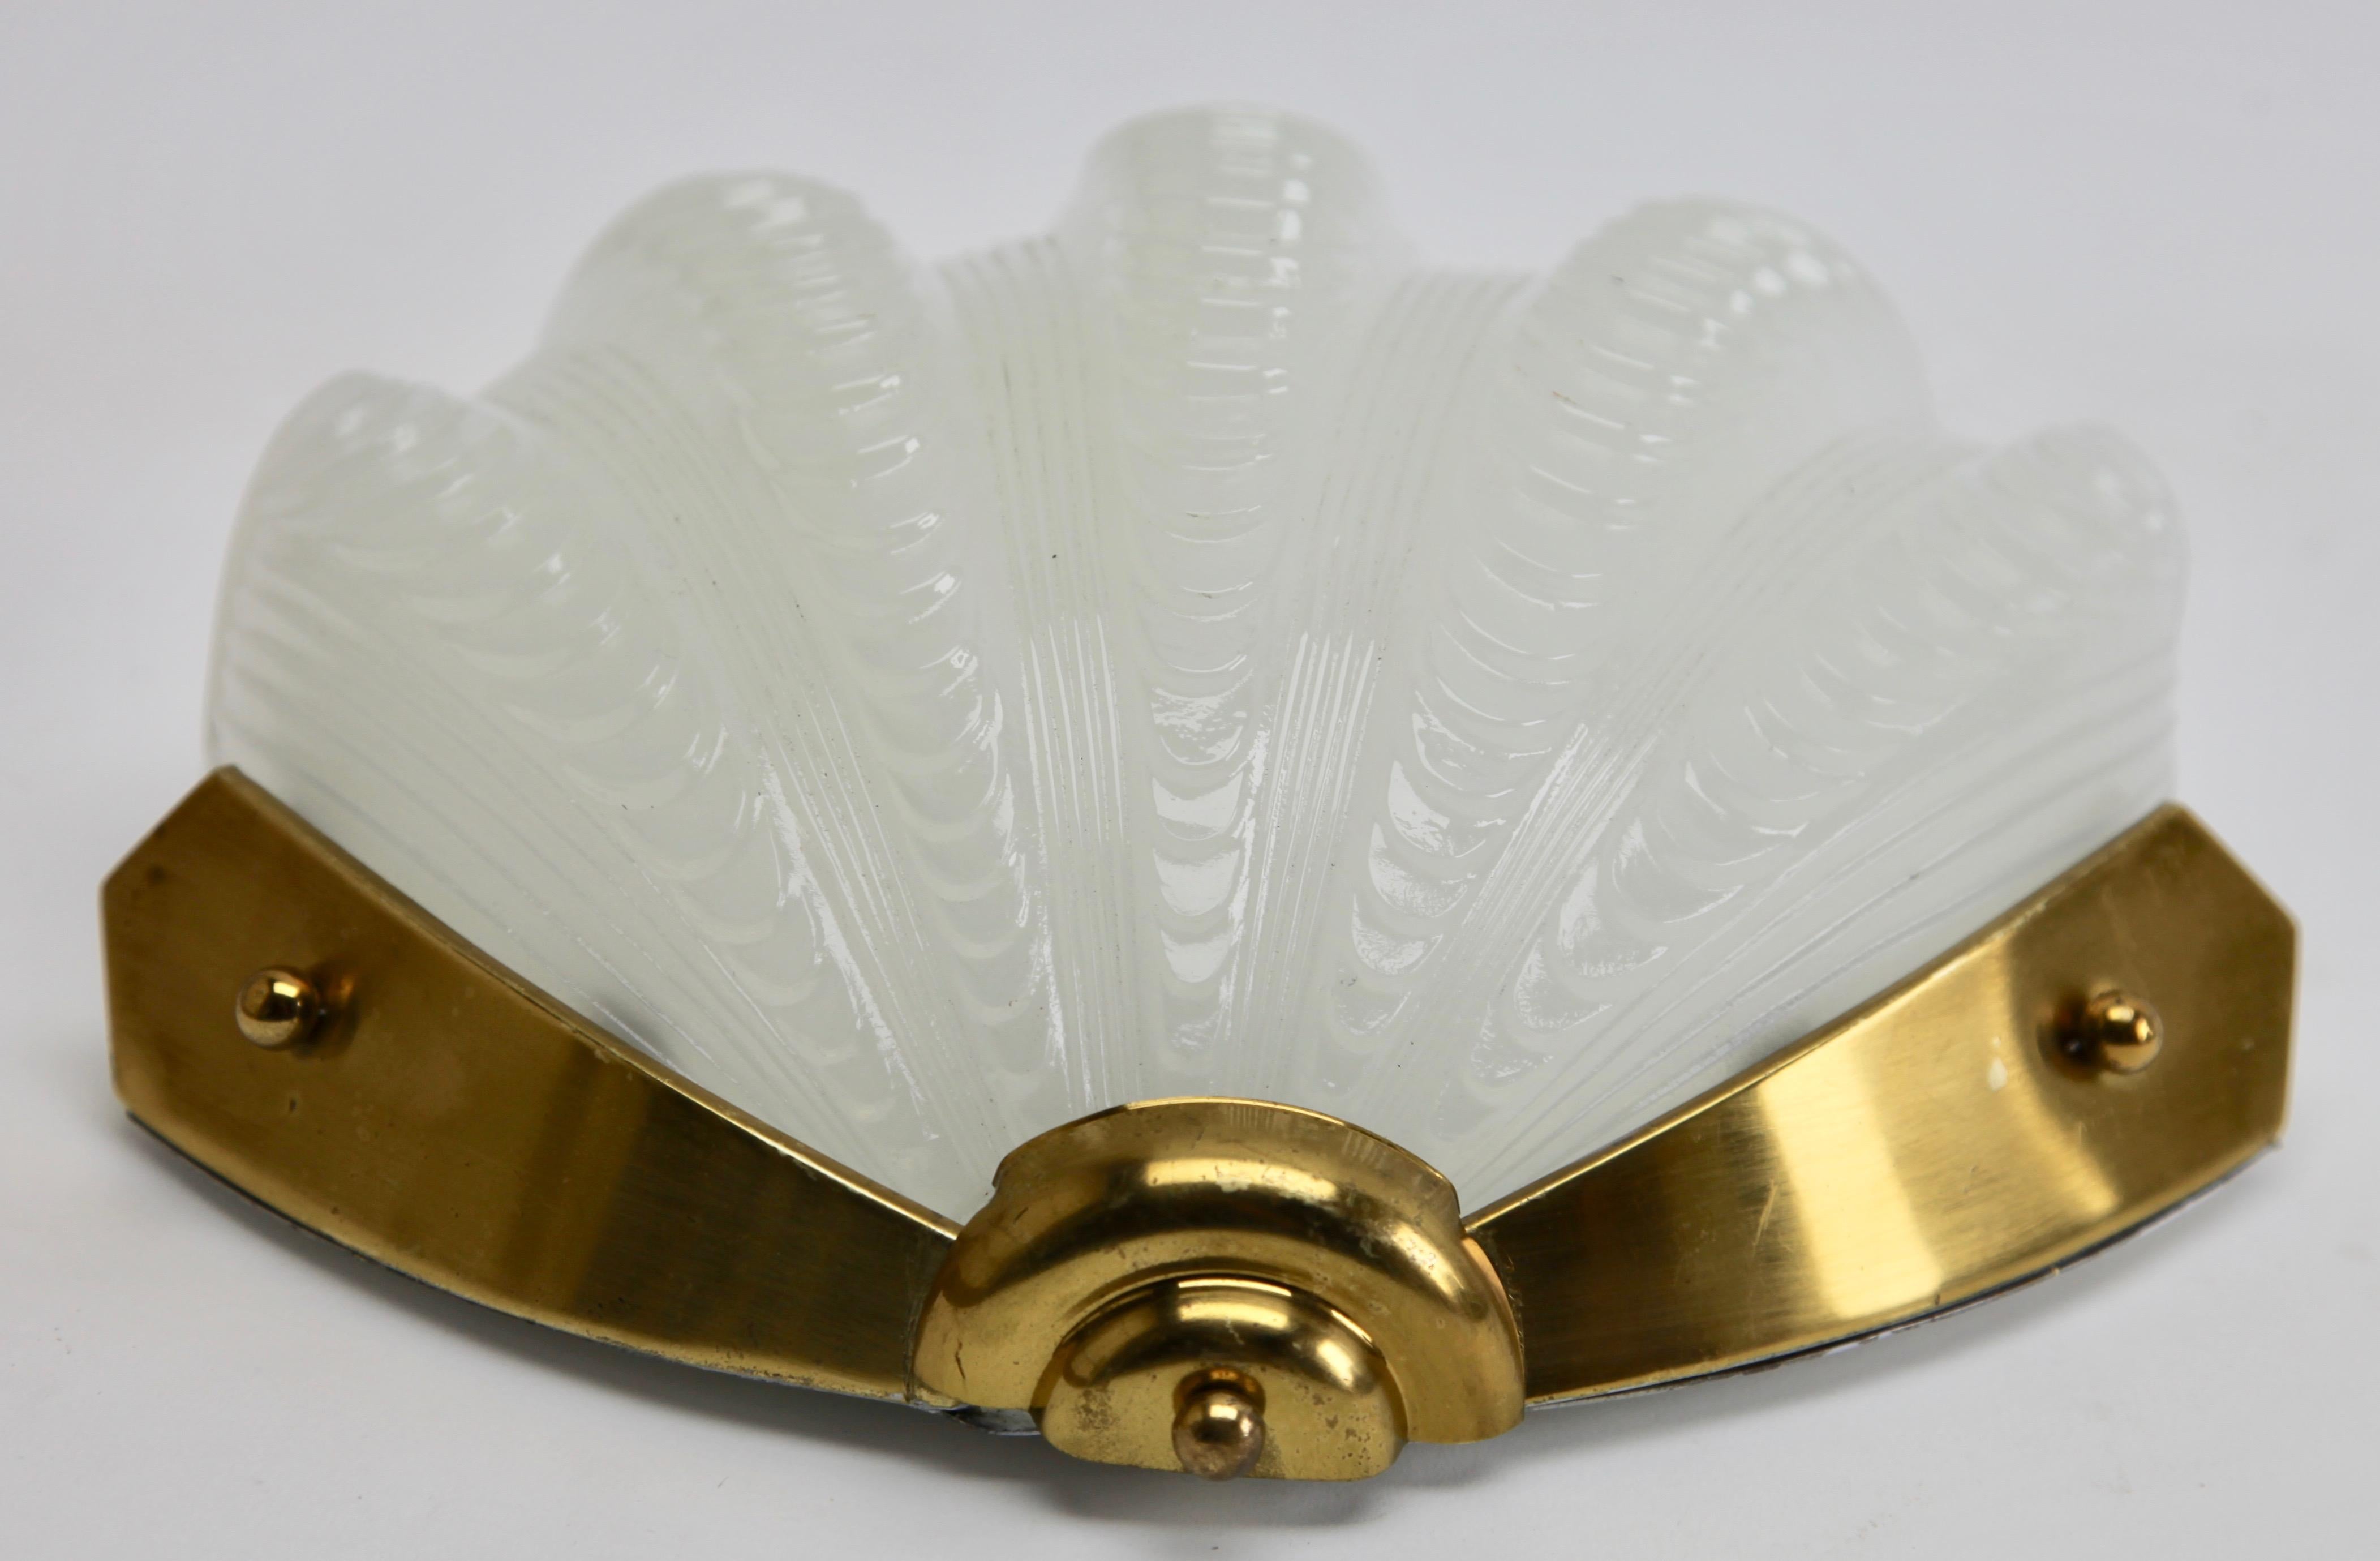 Period wall sconce with a shade modelled as a clamshell. 
Heavy opalescent white glass shade made of pressed glass, securely held in a wall-mount bracket. Good condition with no damage to the glass or metal parts.

Gives soft subdued light for a